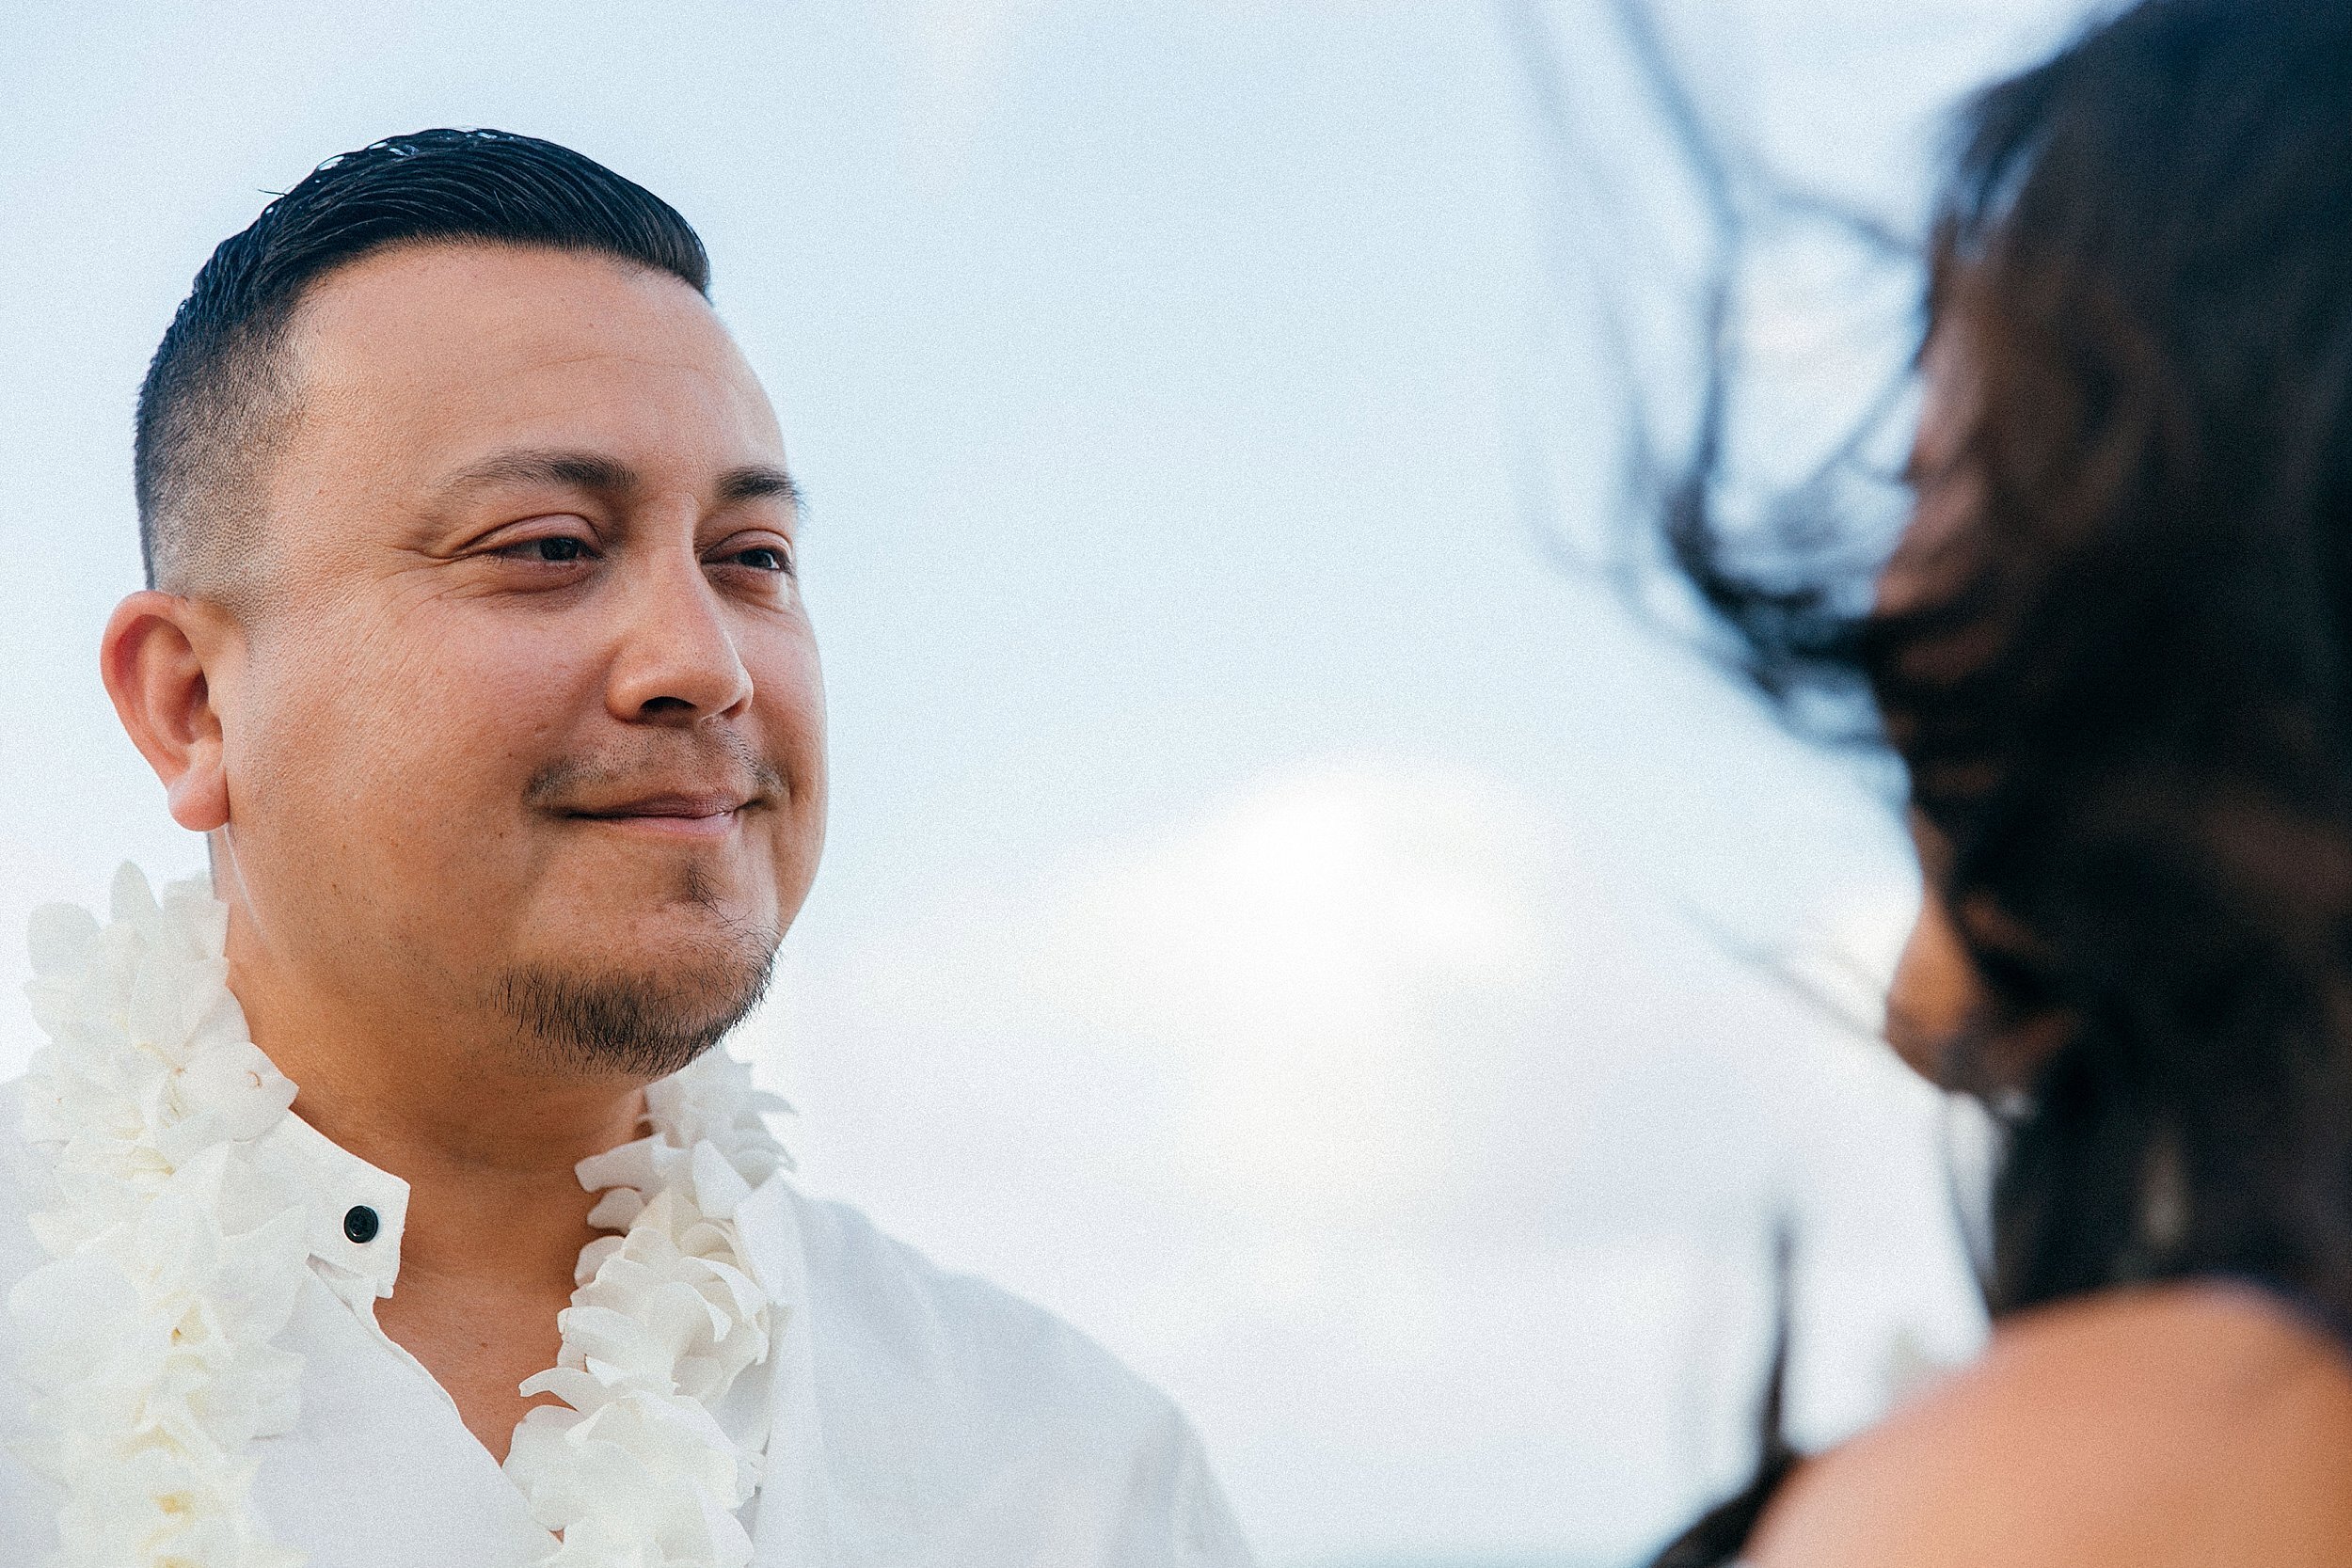  Vow Renewal and Family Session at Temple Beach in Laie 